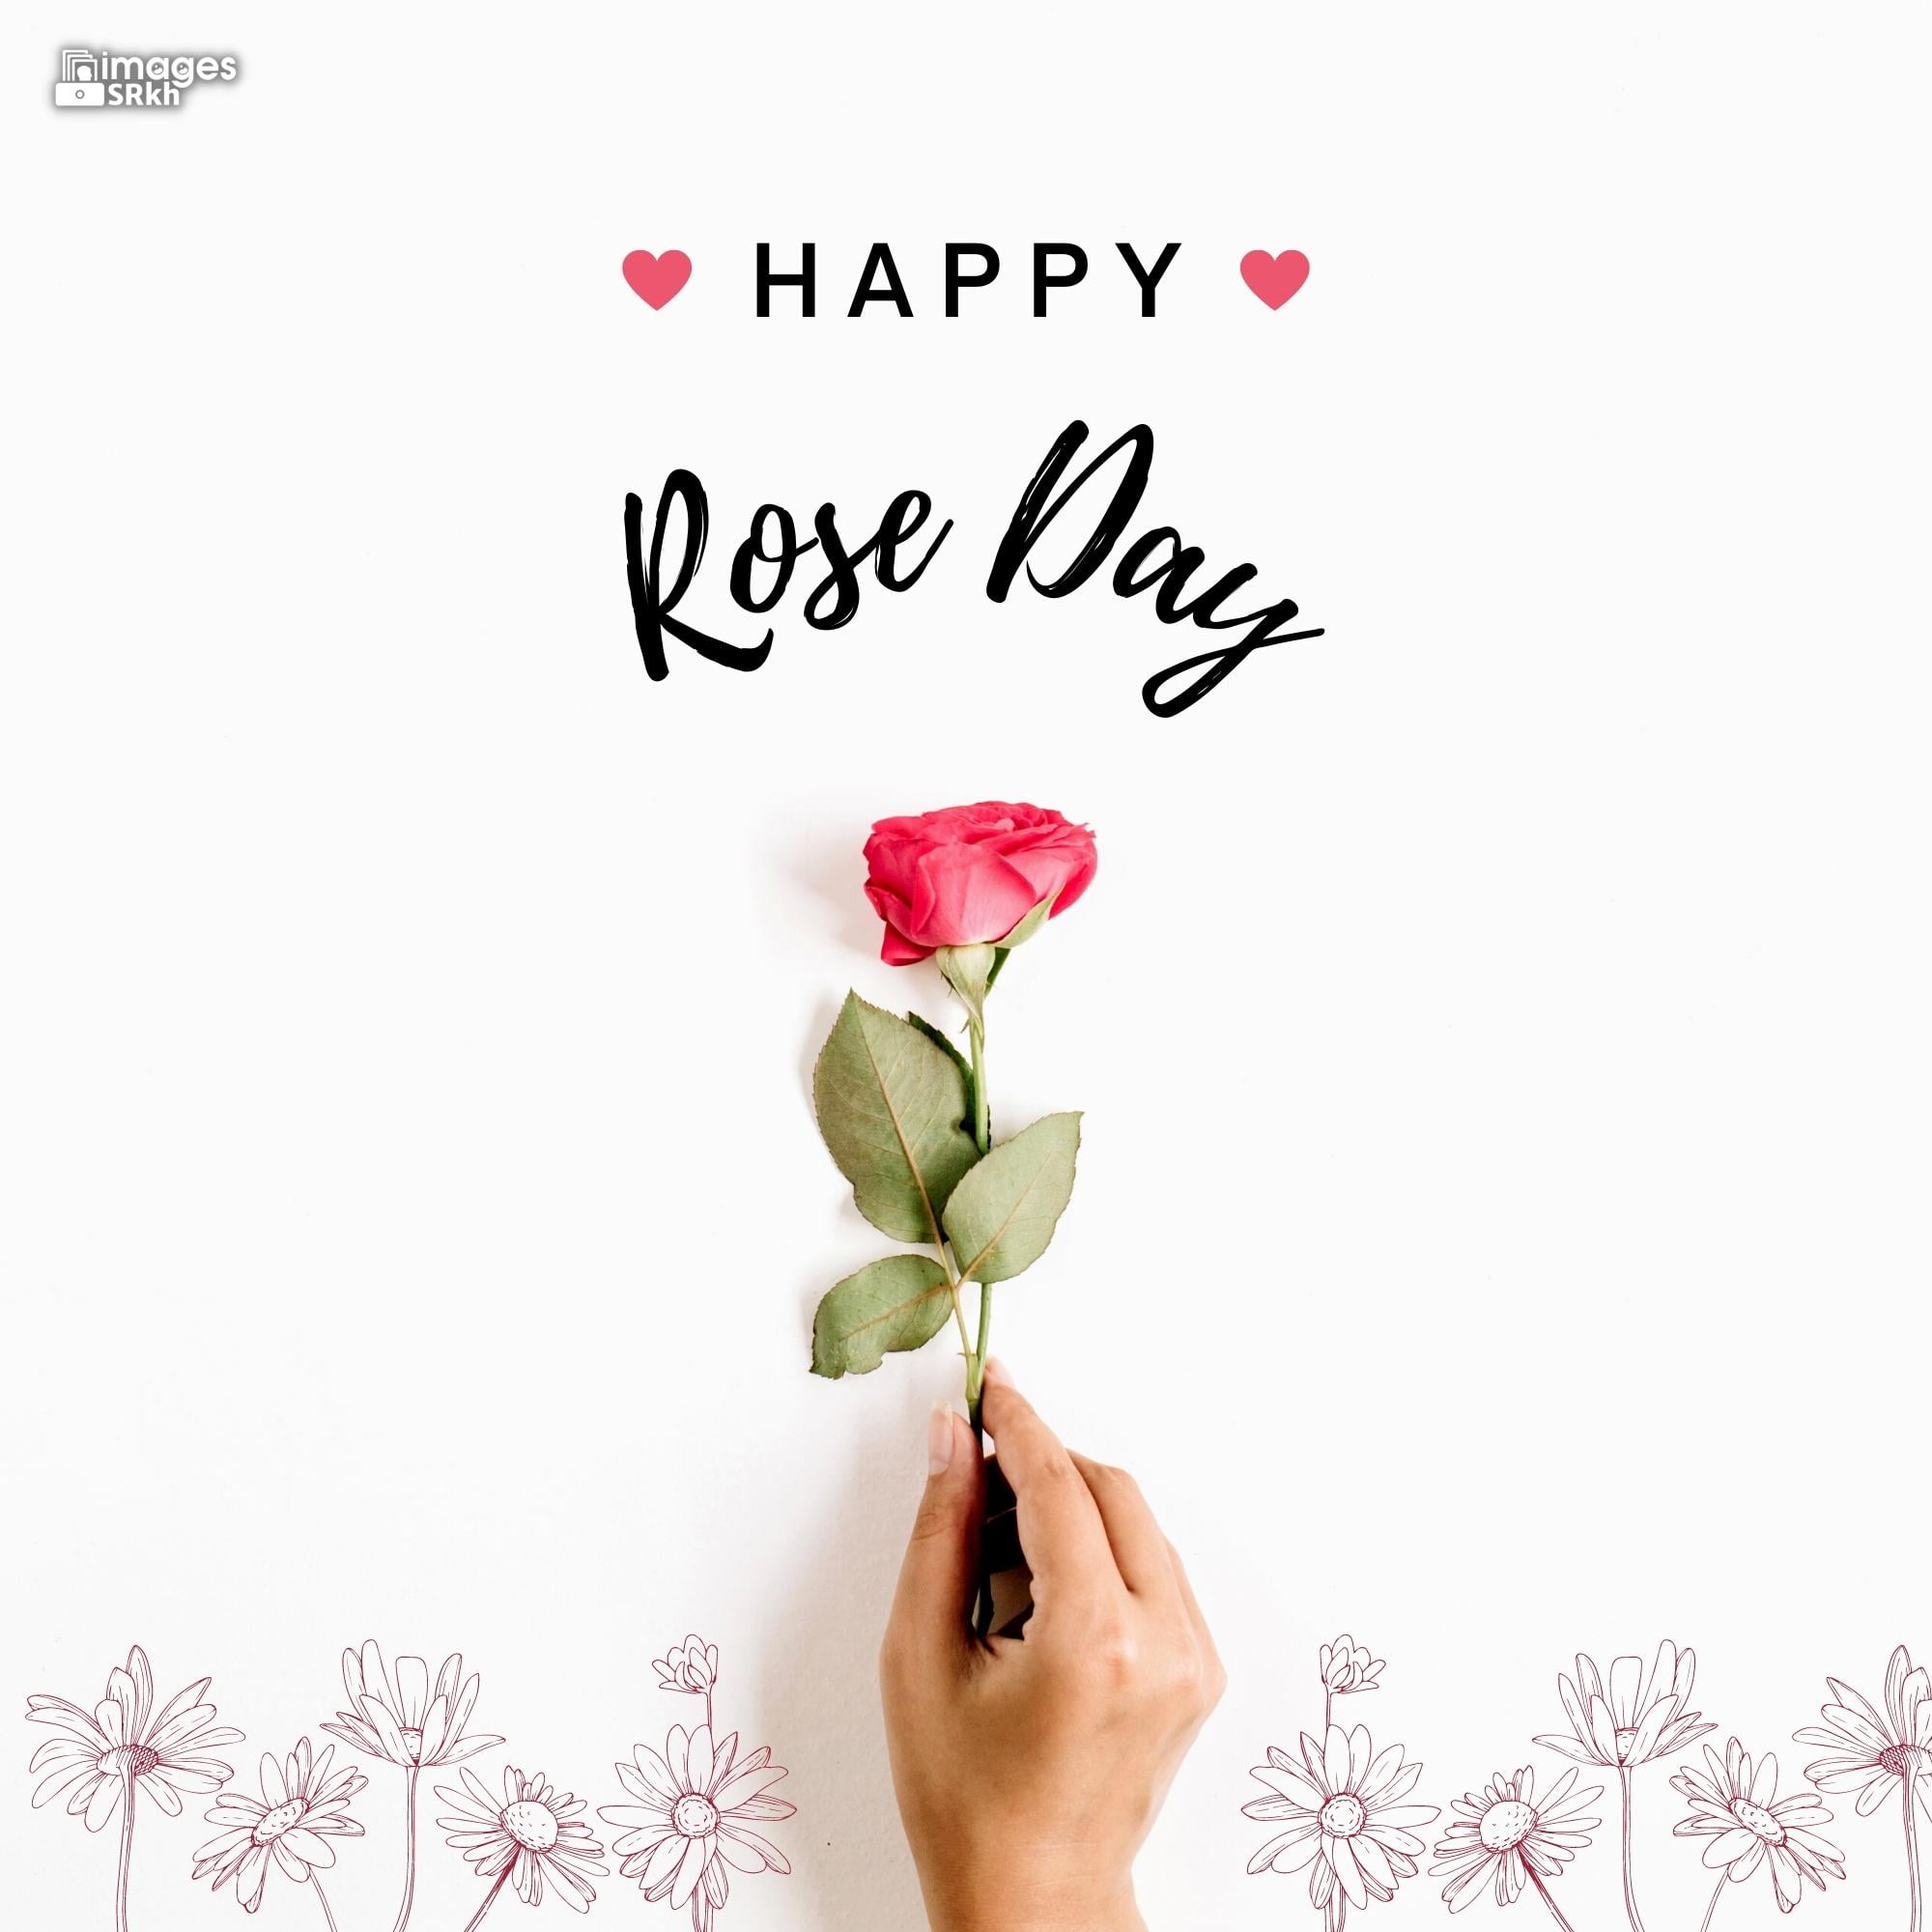 Happy Rose Day Image Hd Download (78)